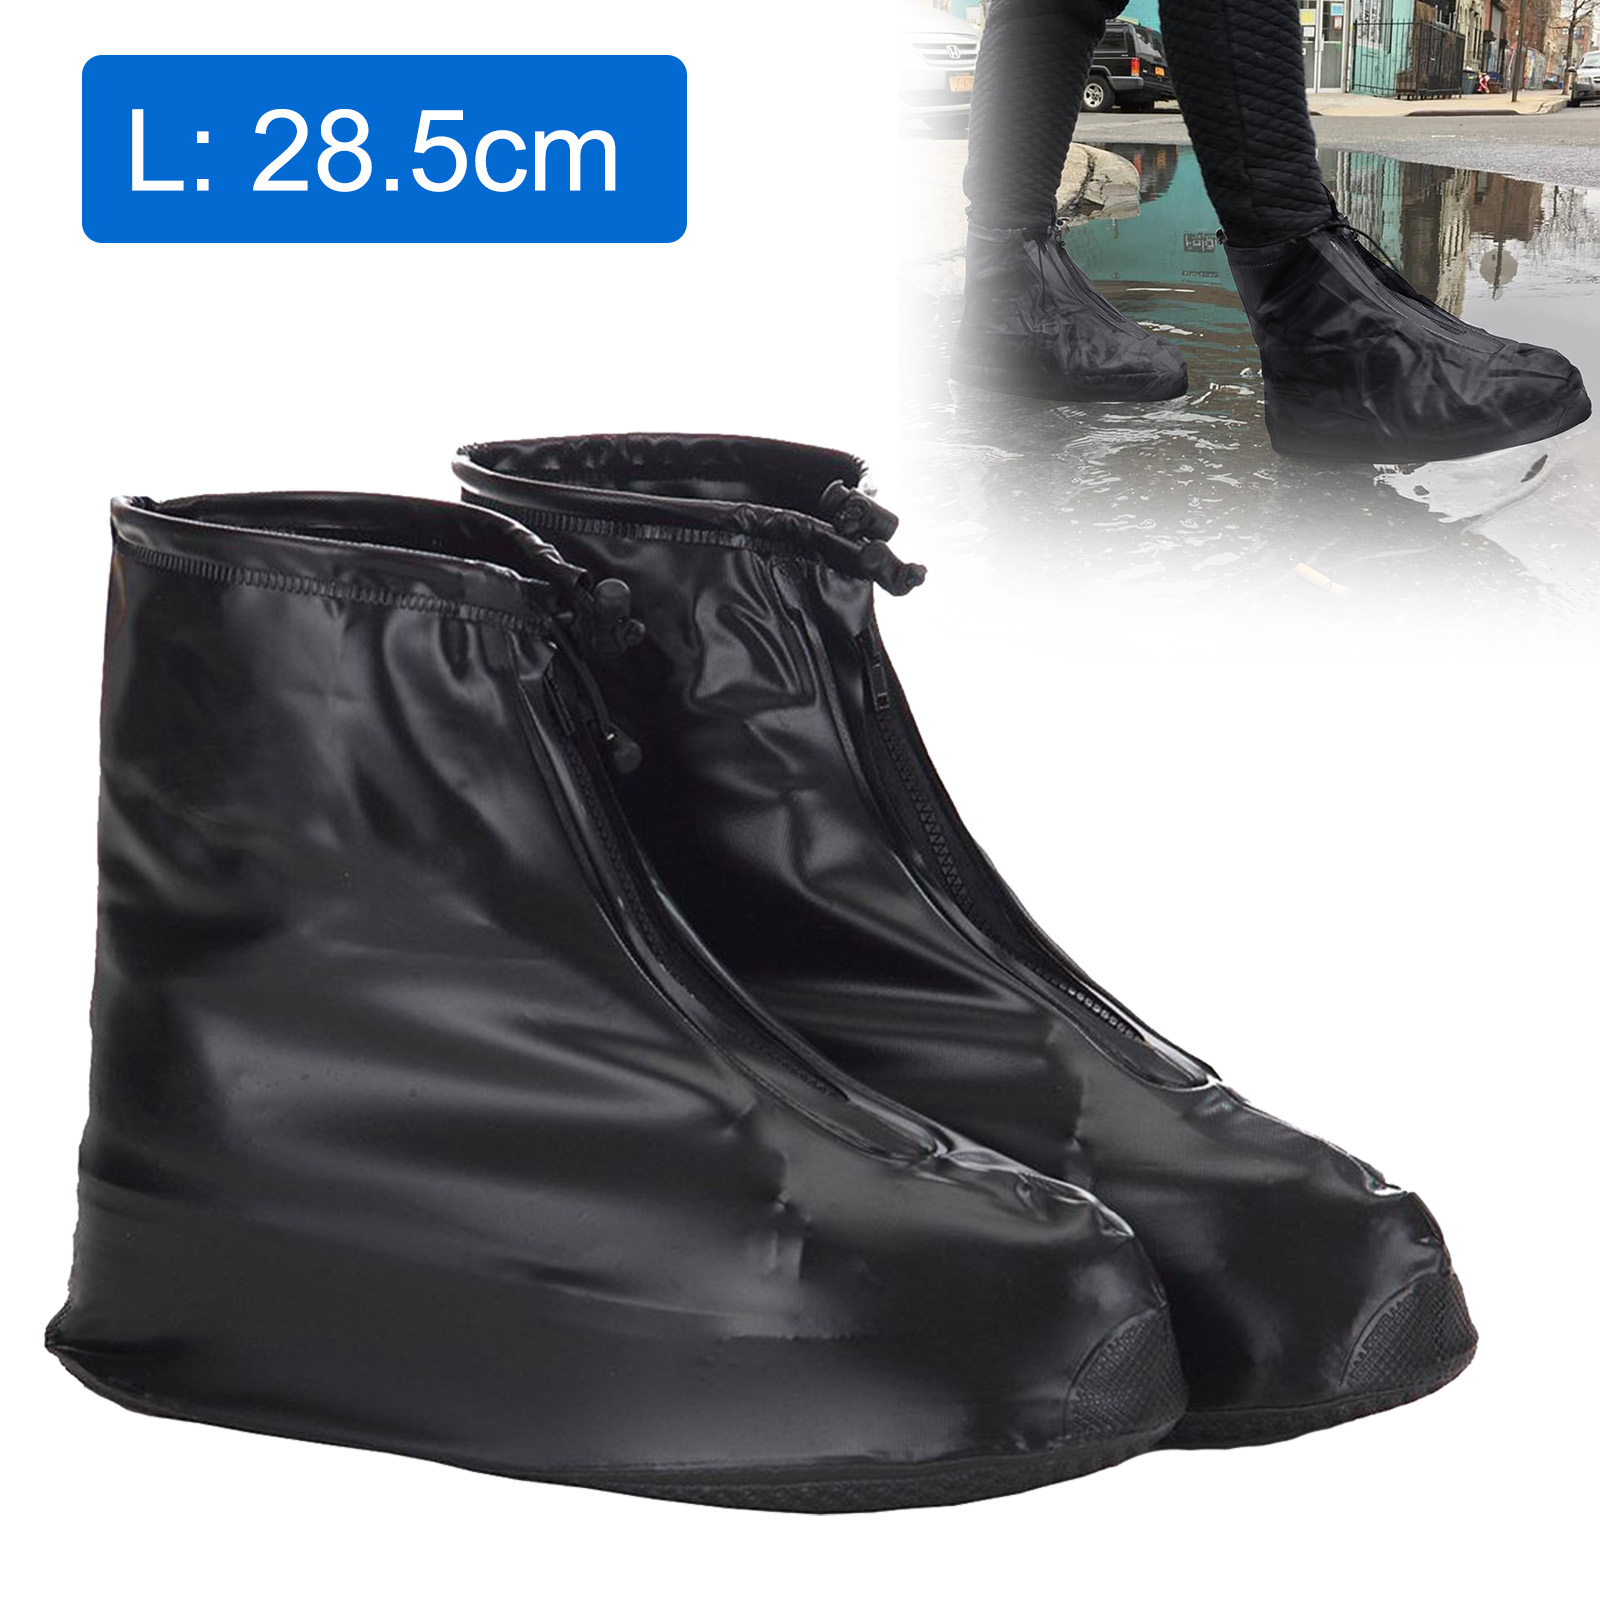 Rain Shoe Covers Boots Protector Overshoes Galoshes Waterproof & Reusable 